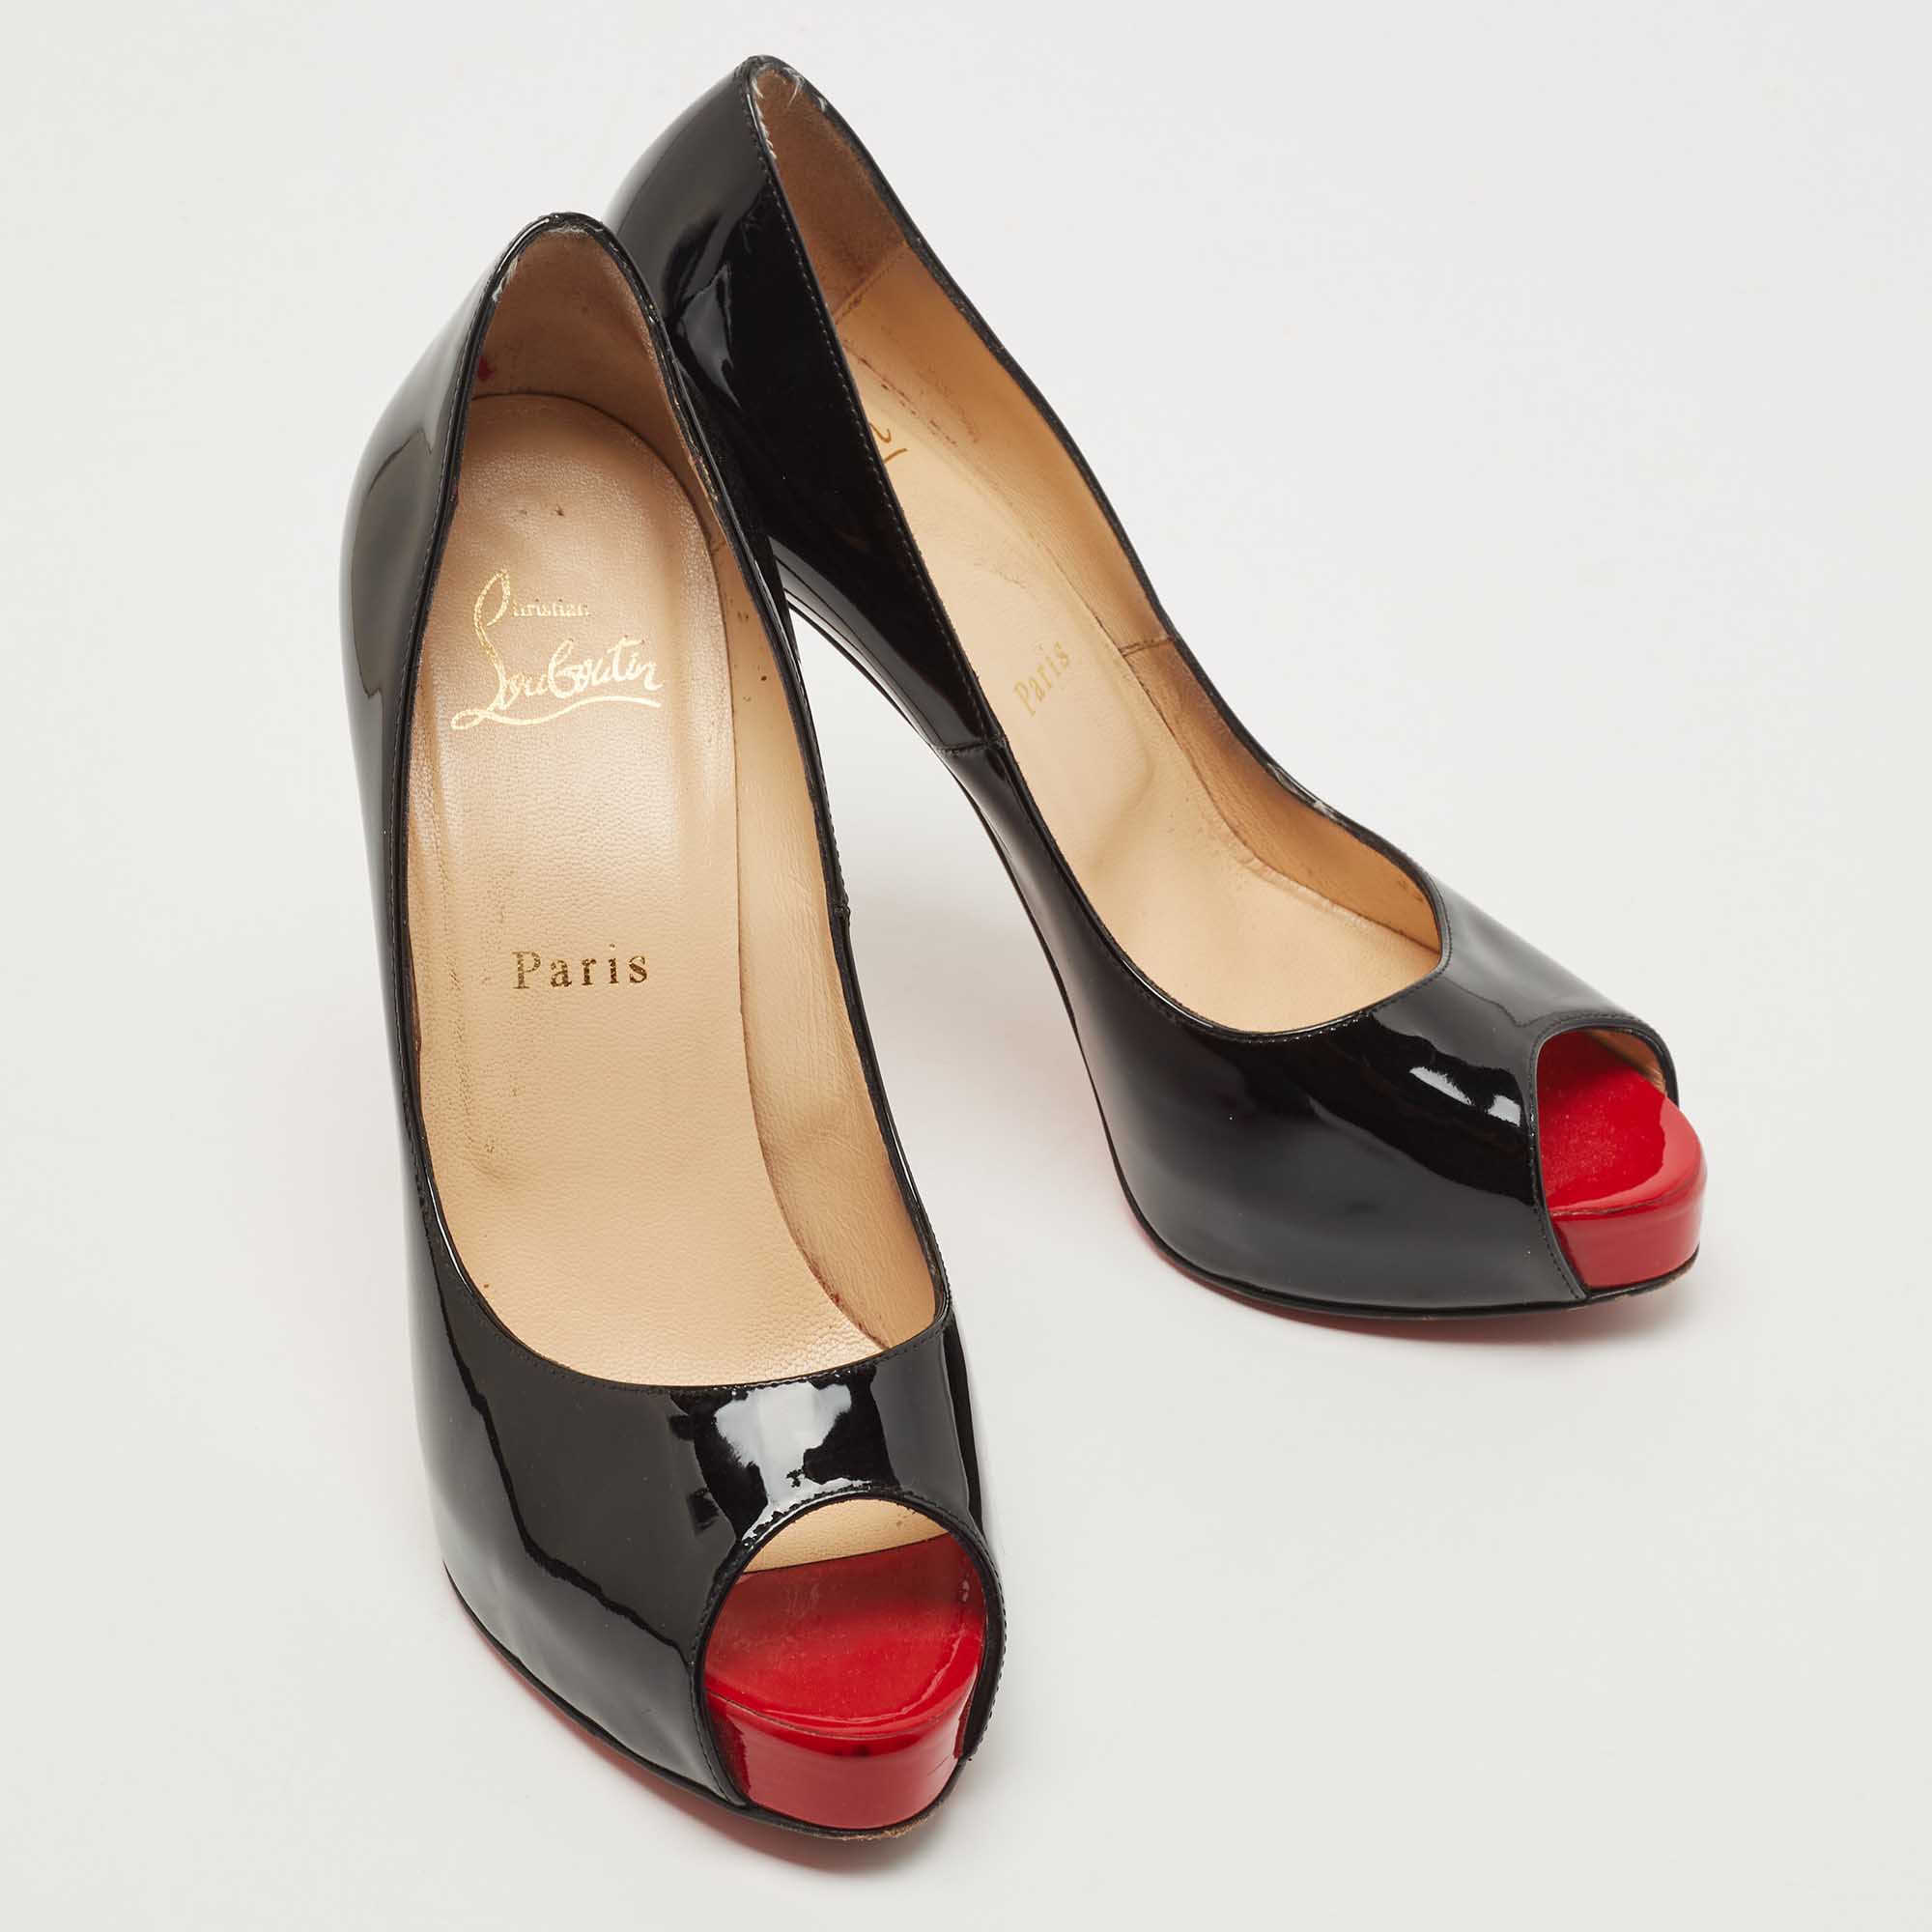 Christian Louboutin Black Patent Leather New Very Prive Pumps Size 37.5